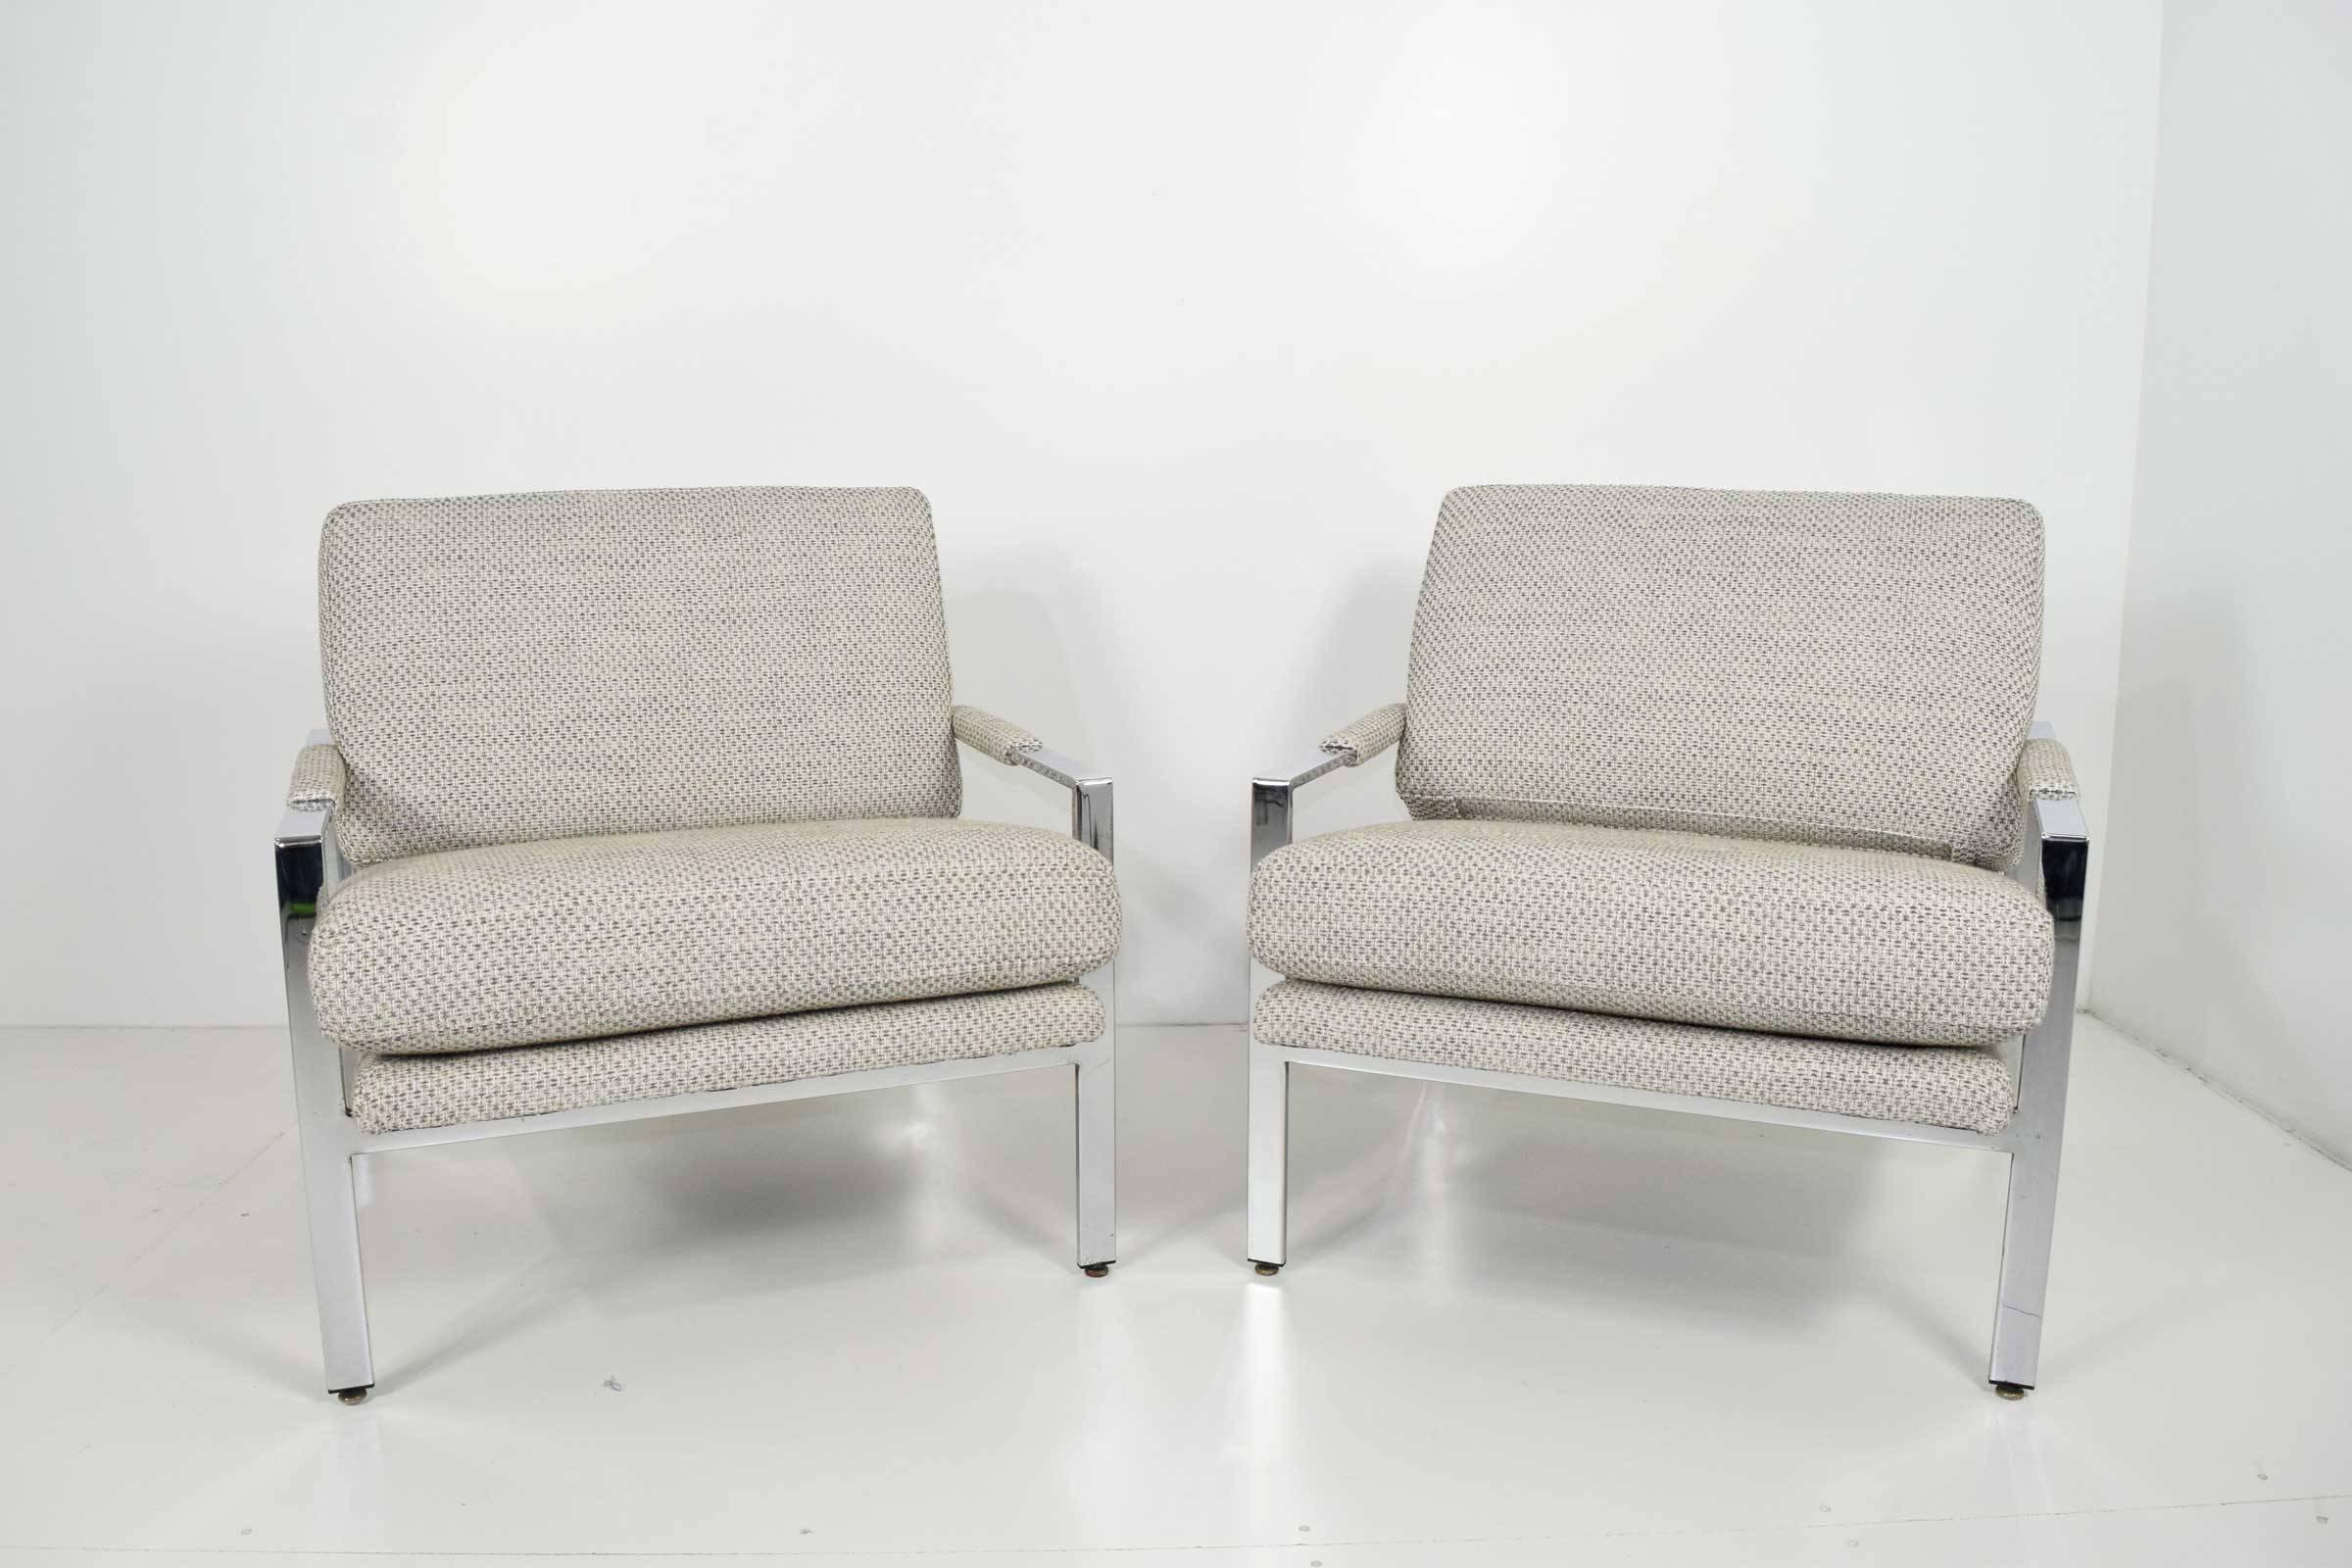 Upholstery from Ligne Roset, high quality. Beautiful brown, gray or bronze and off-white. 